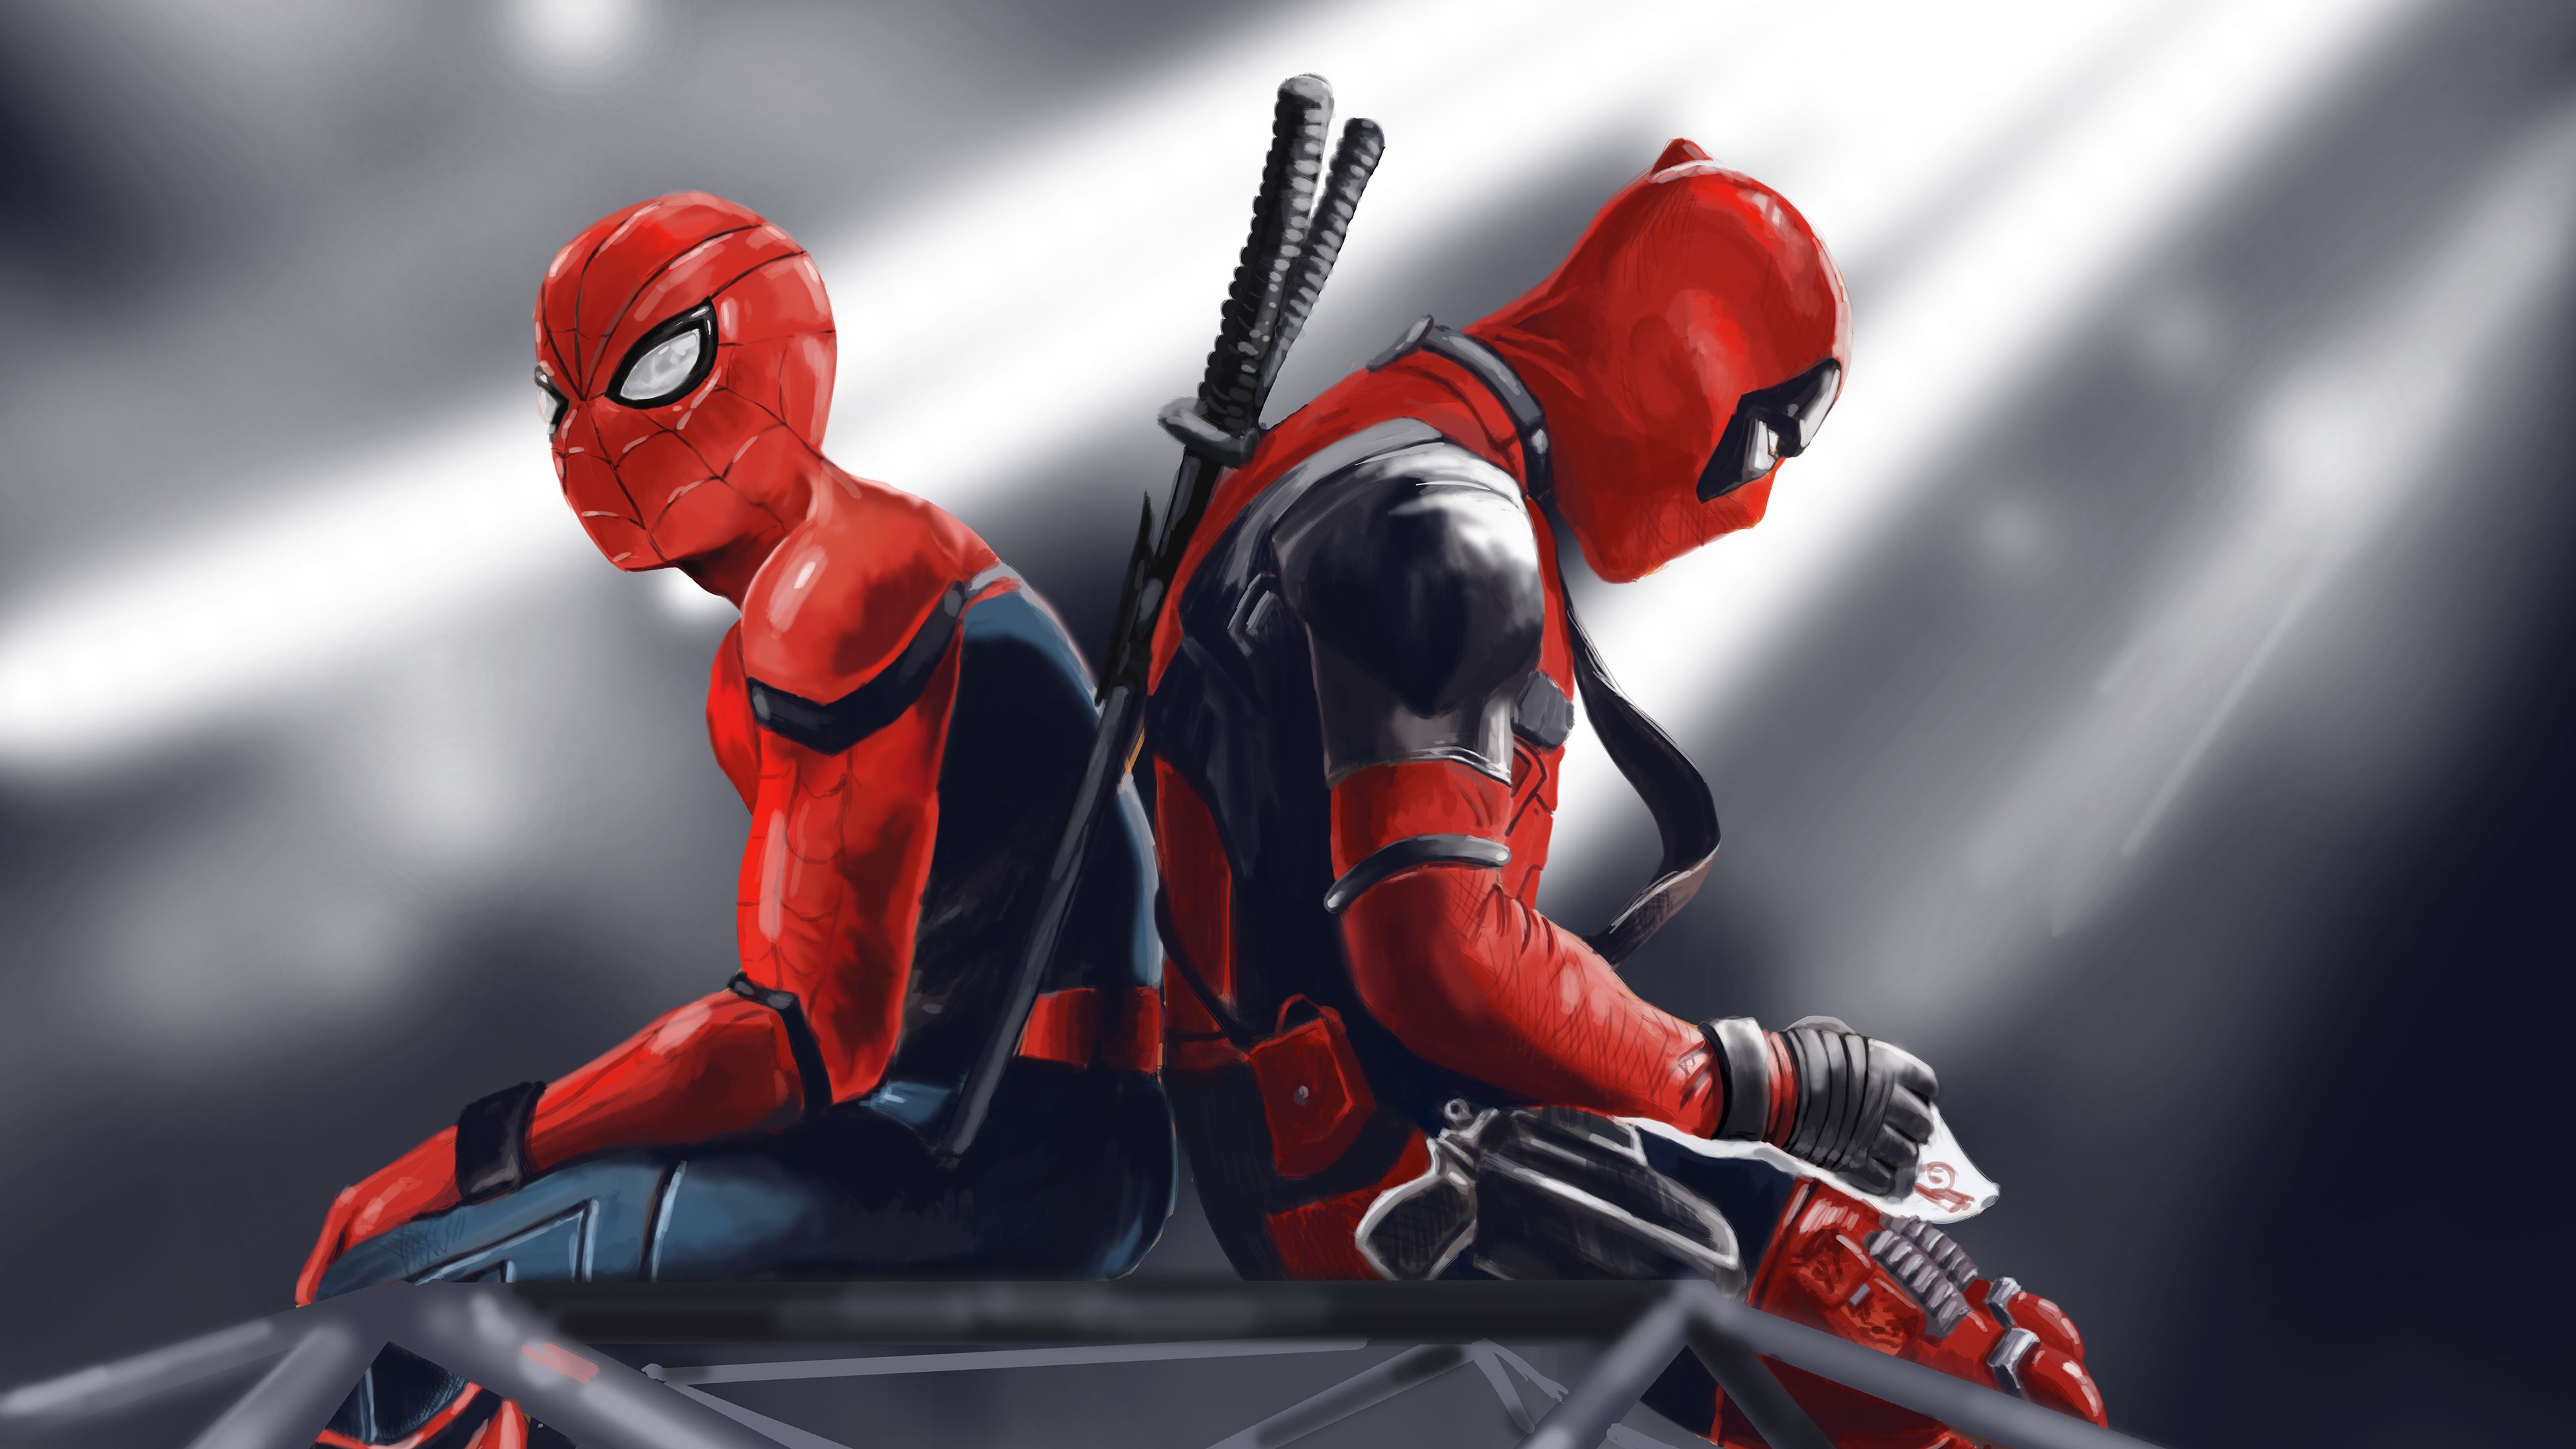 Deadpool And Spiderman Wallpaper Free Deadpool And Spiderman Background